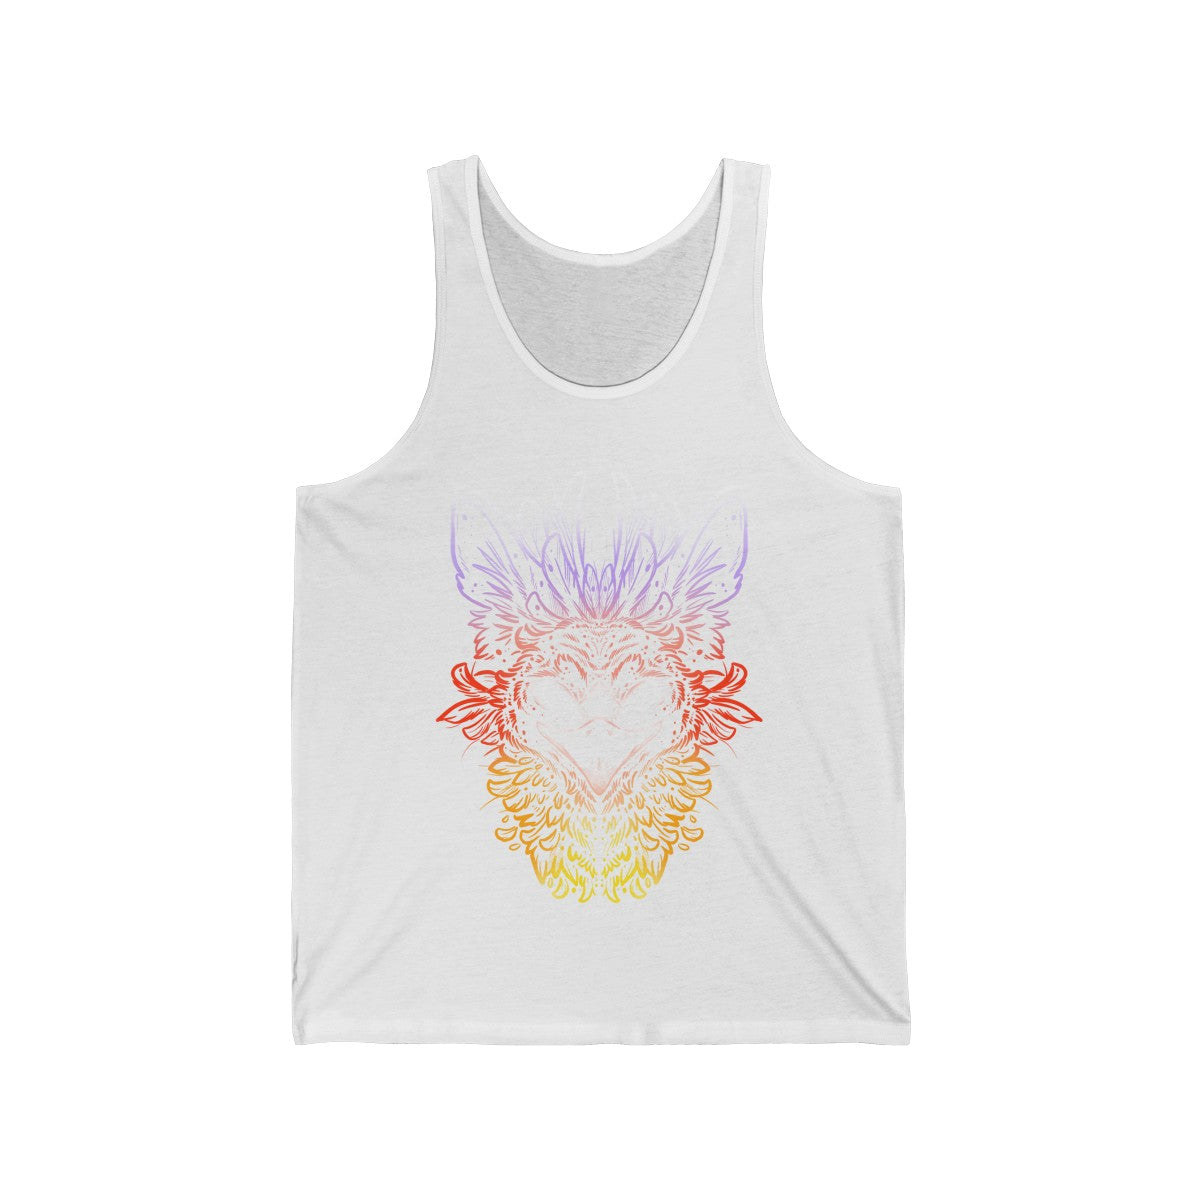 Griffin - Tank Top Tank Top Dire Creatures White XS 